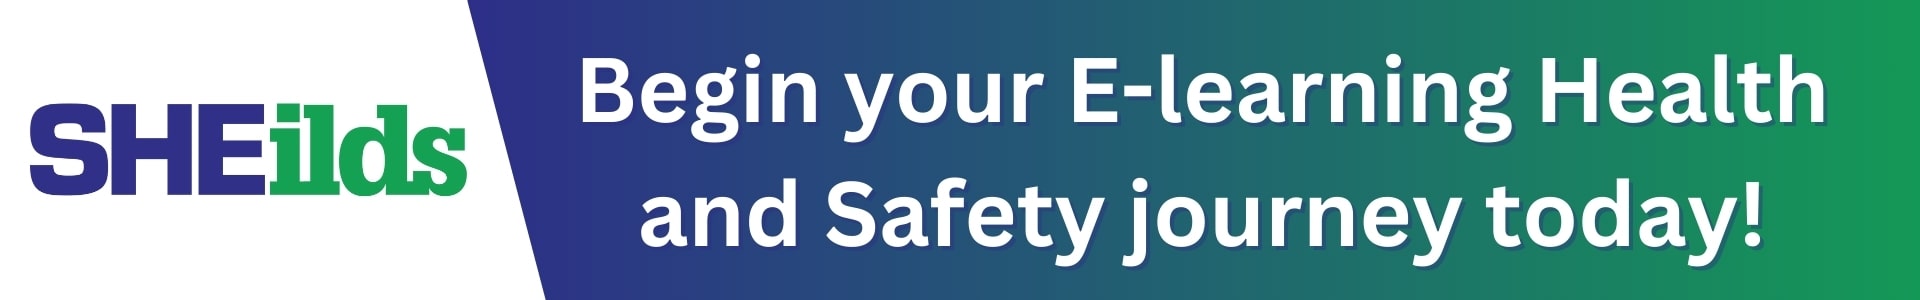 Begin your eLearning Health and Safety journey today